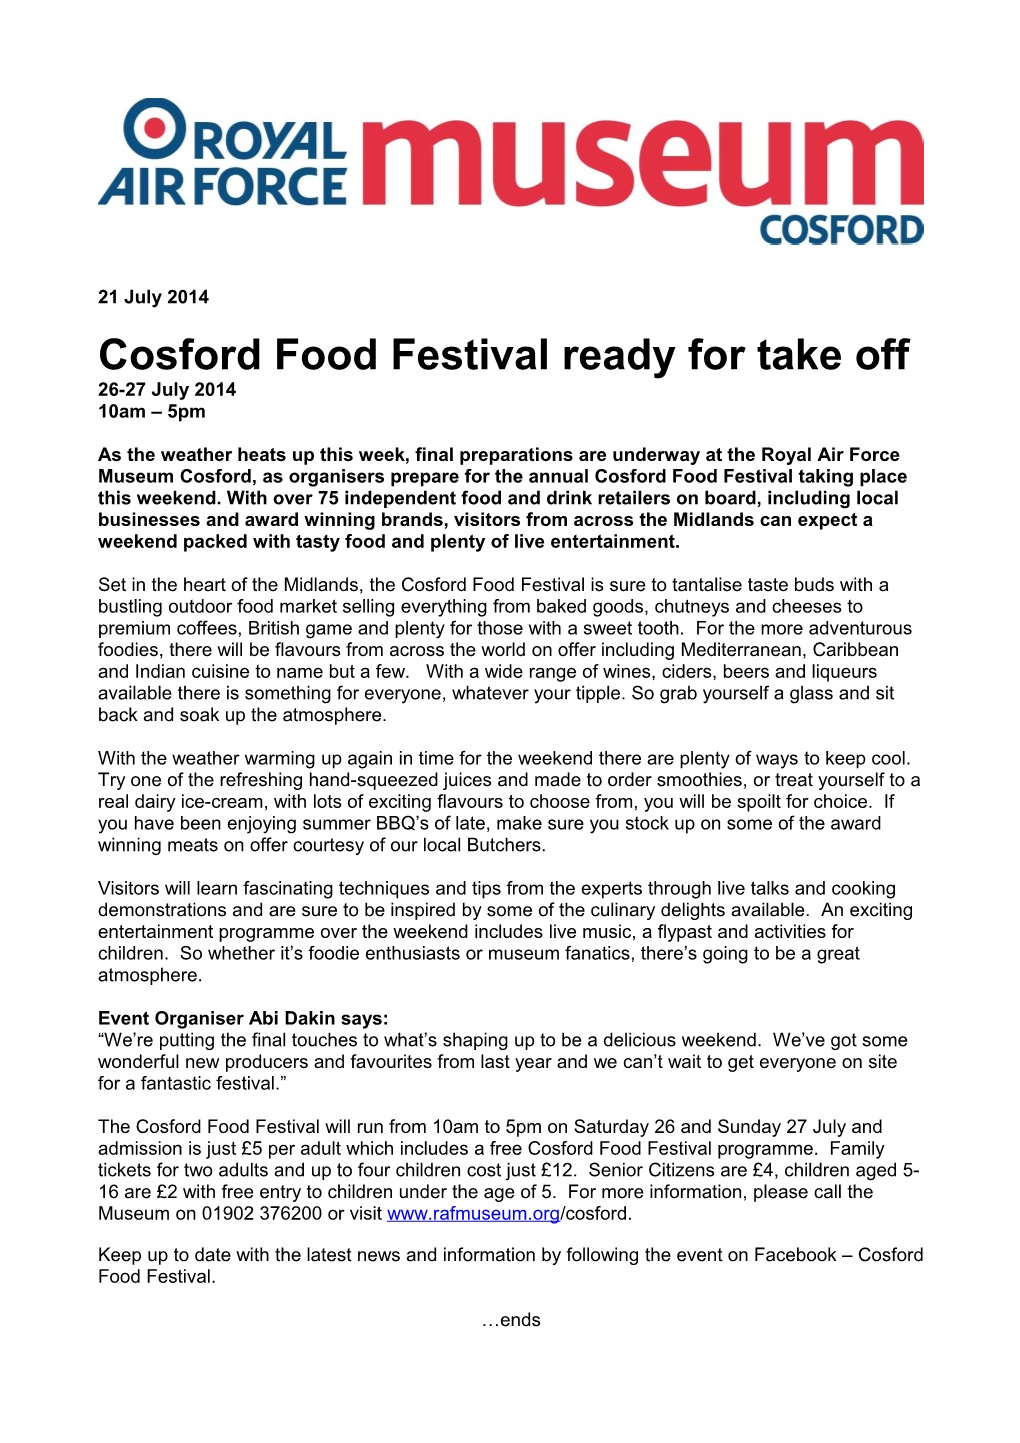 Cosford Food Festival Ready for Take Off